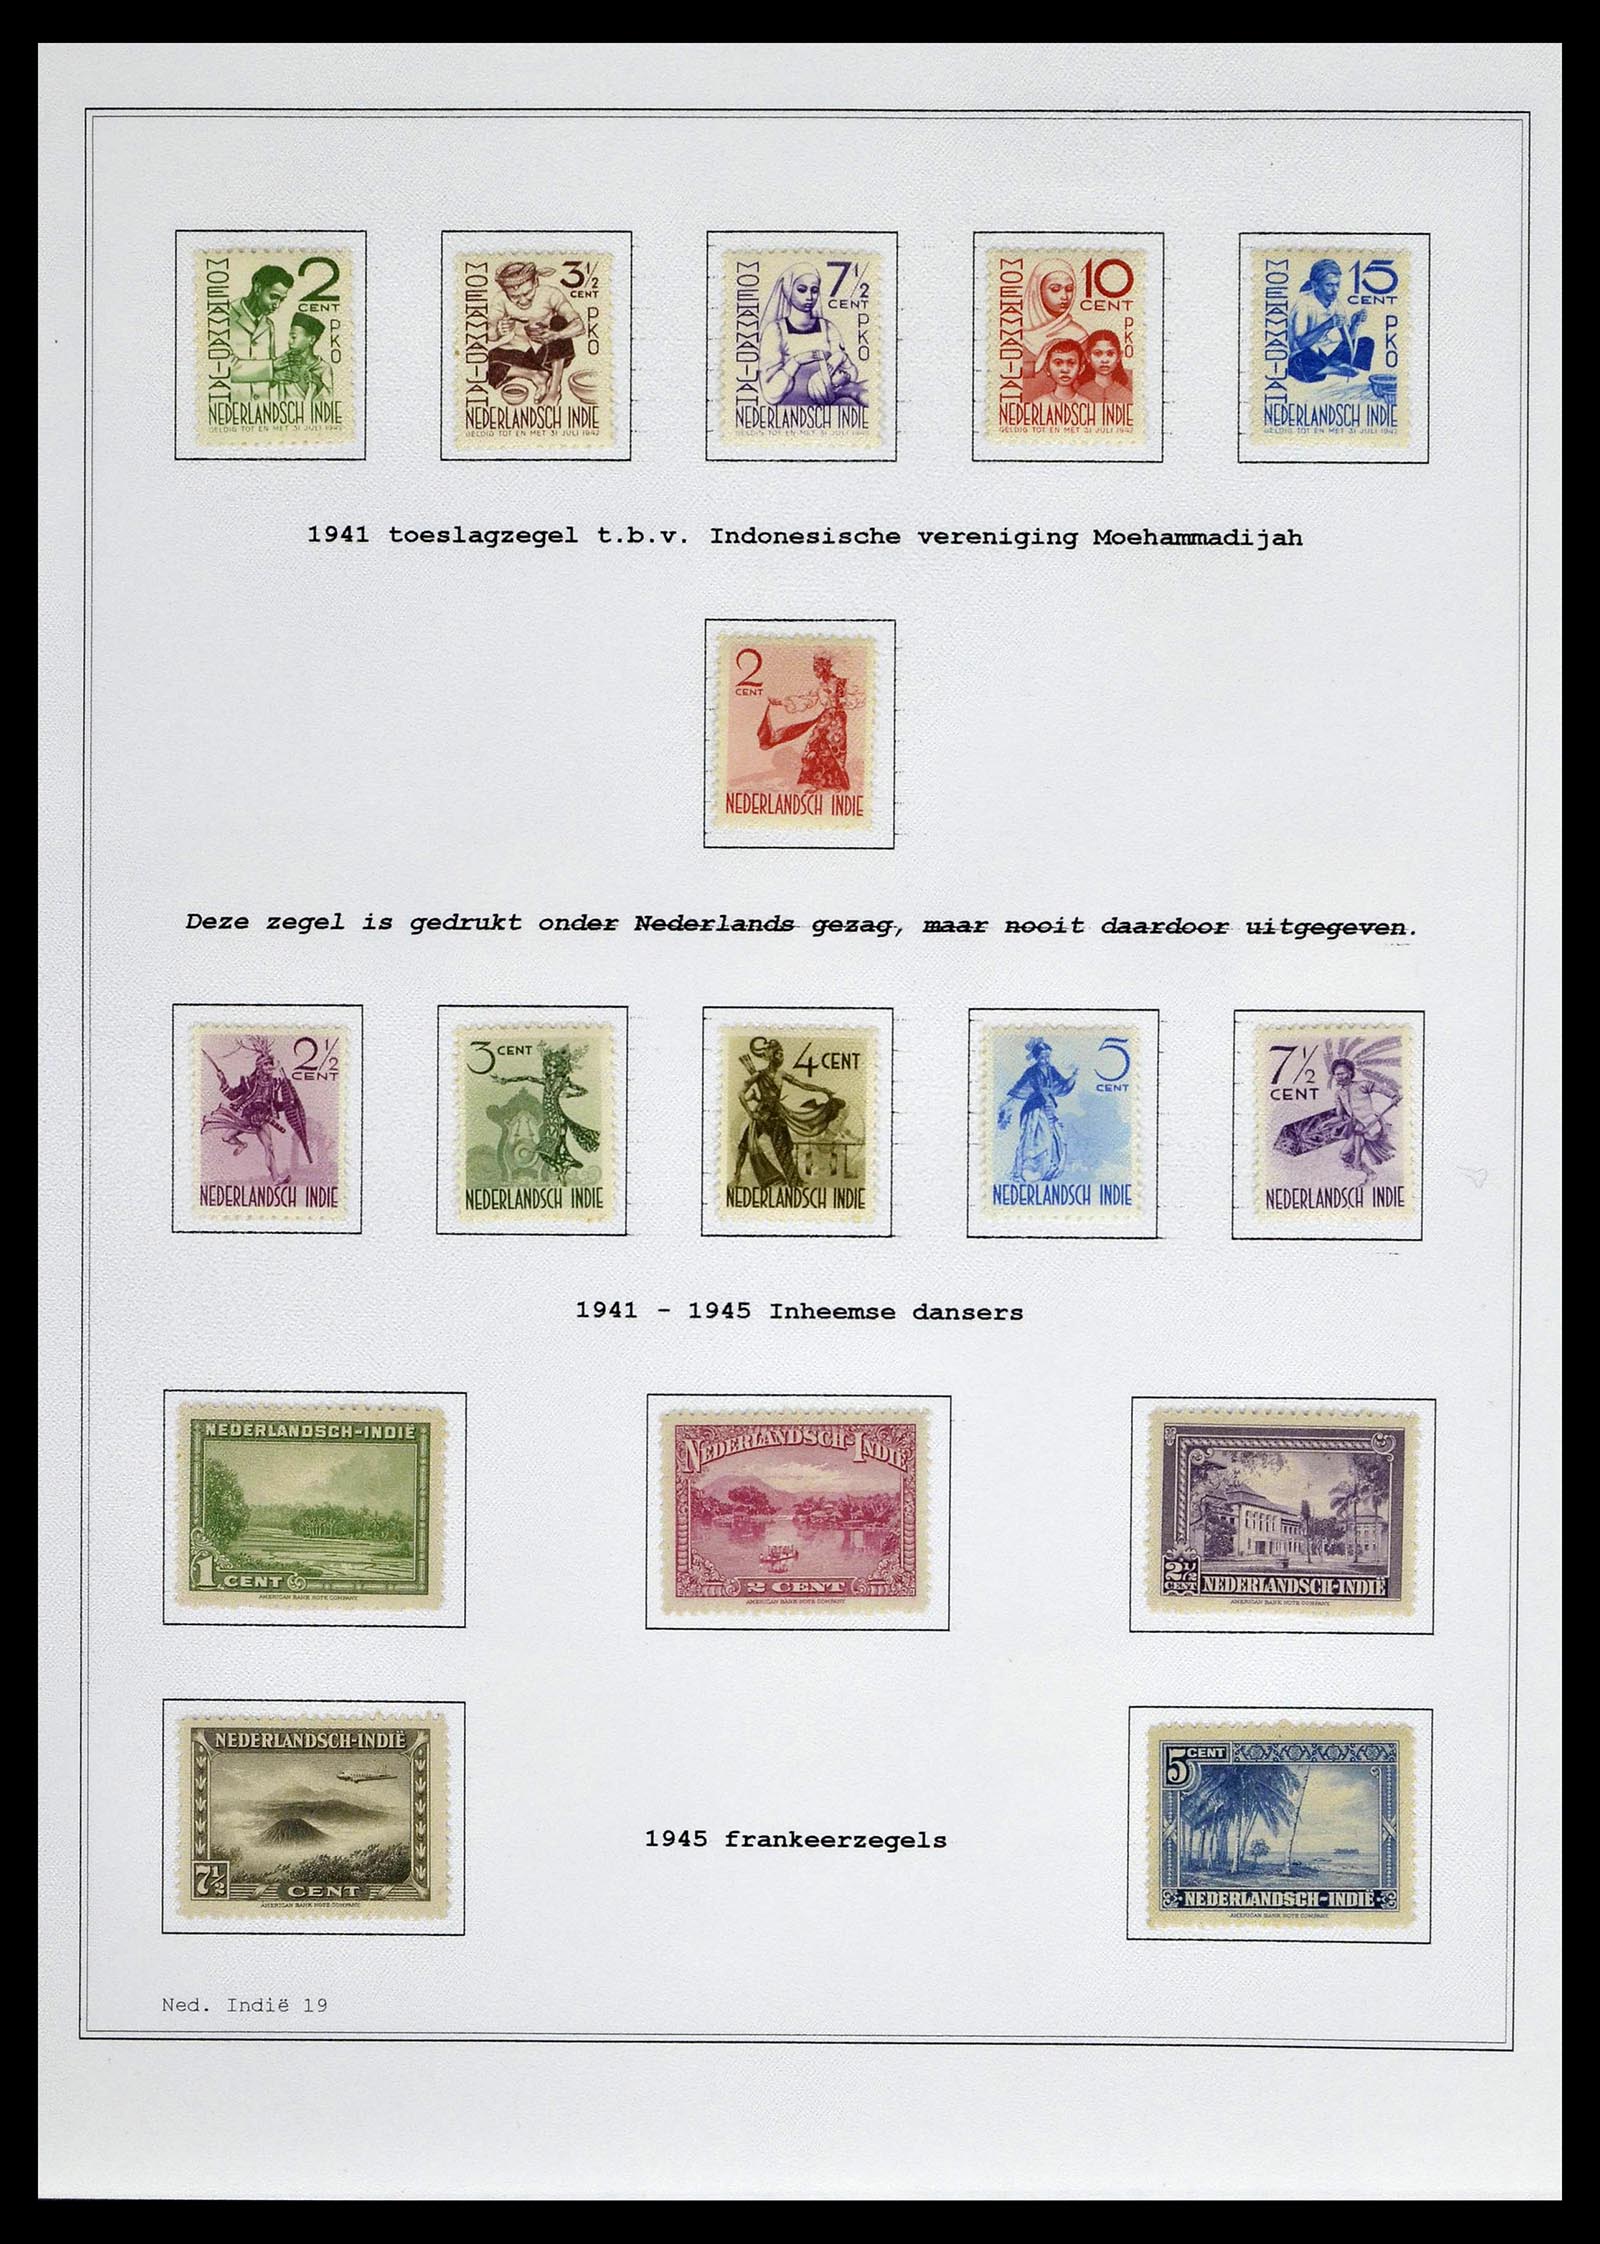 39026 0037 - Stamp collection 39026 Dutch east Indies and Suriname 1864-1975.